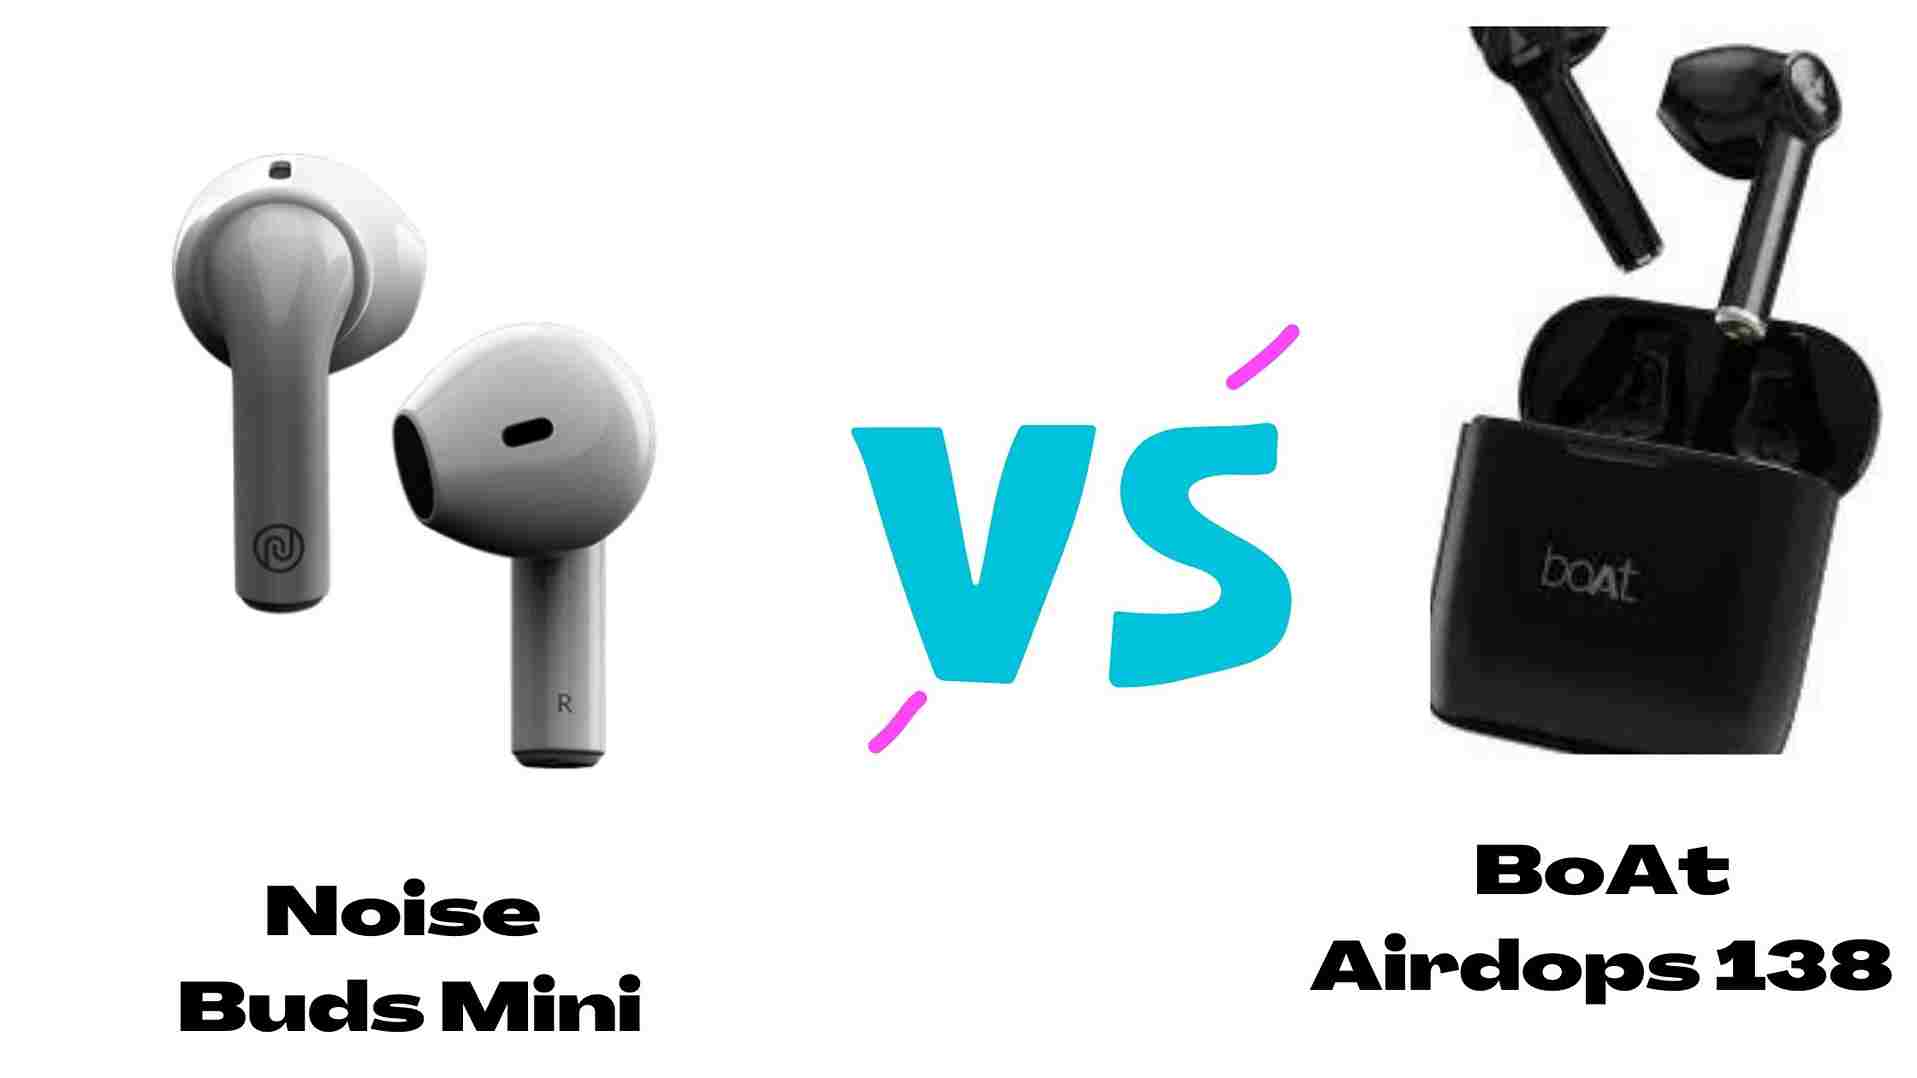 Which Best? Noise Air Buds Mini vs Boat Airdopes 138